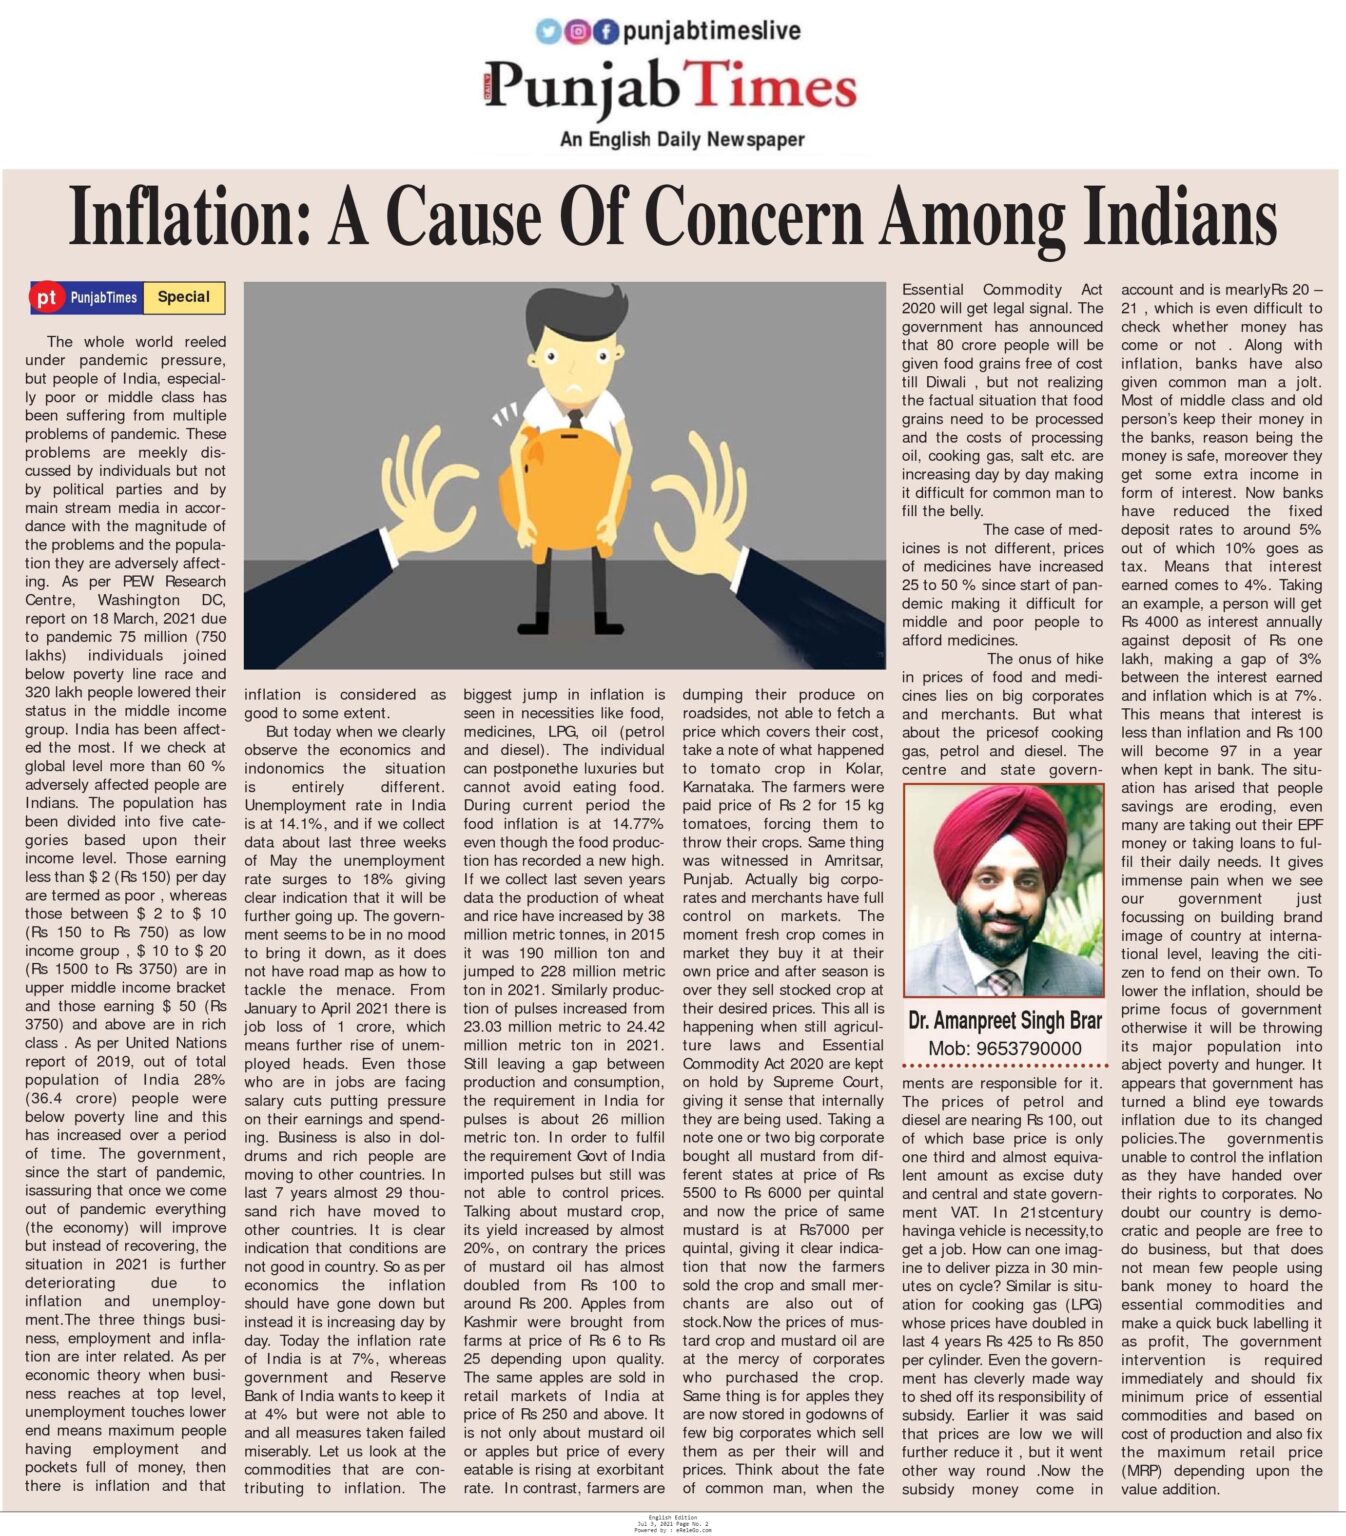 speech on inflation in india